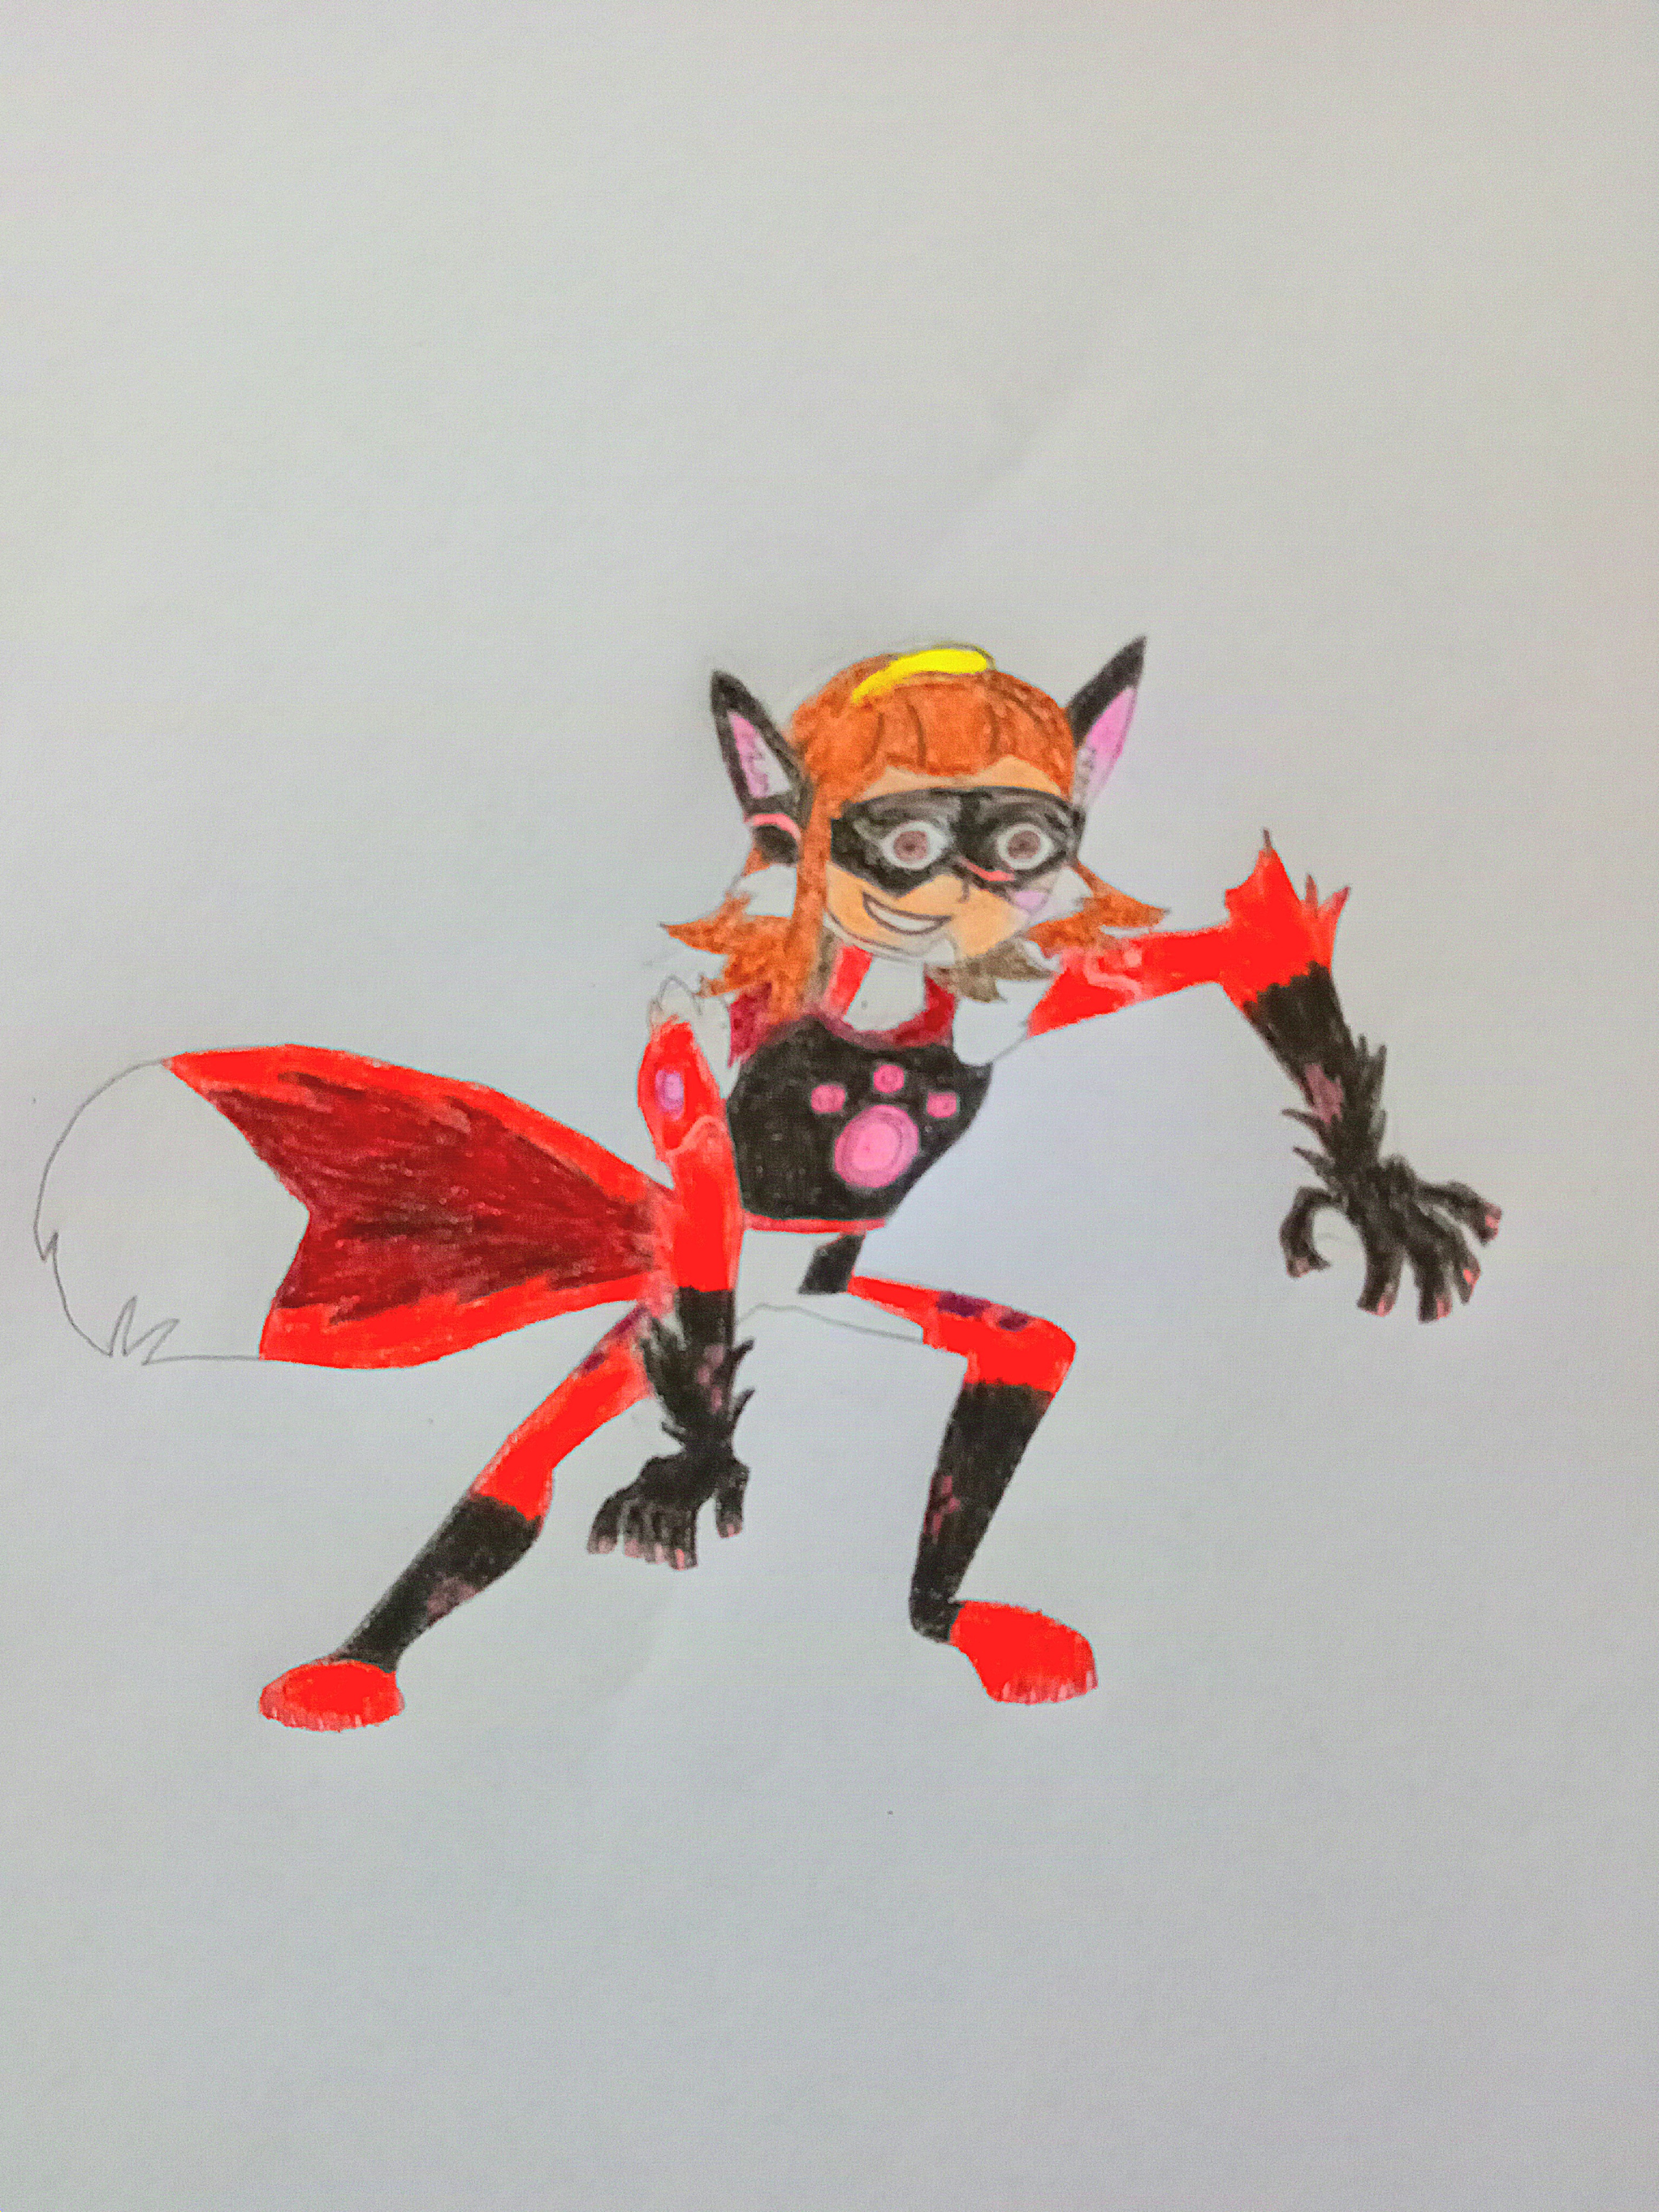 Ember with Red Fox Power by wildguardianangel31 on DeviantArt